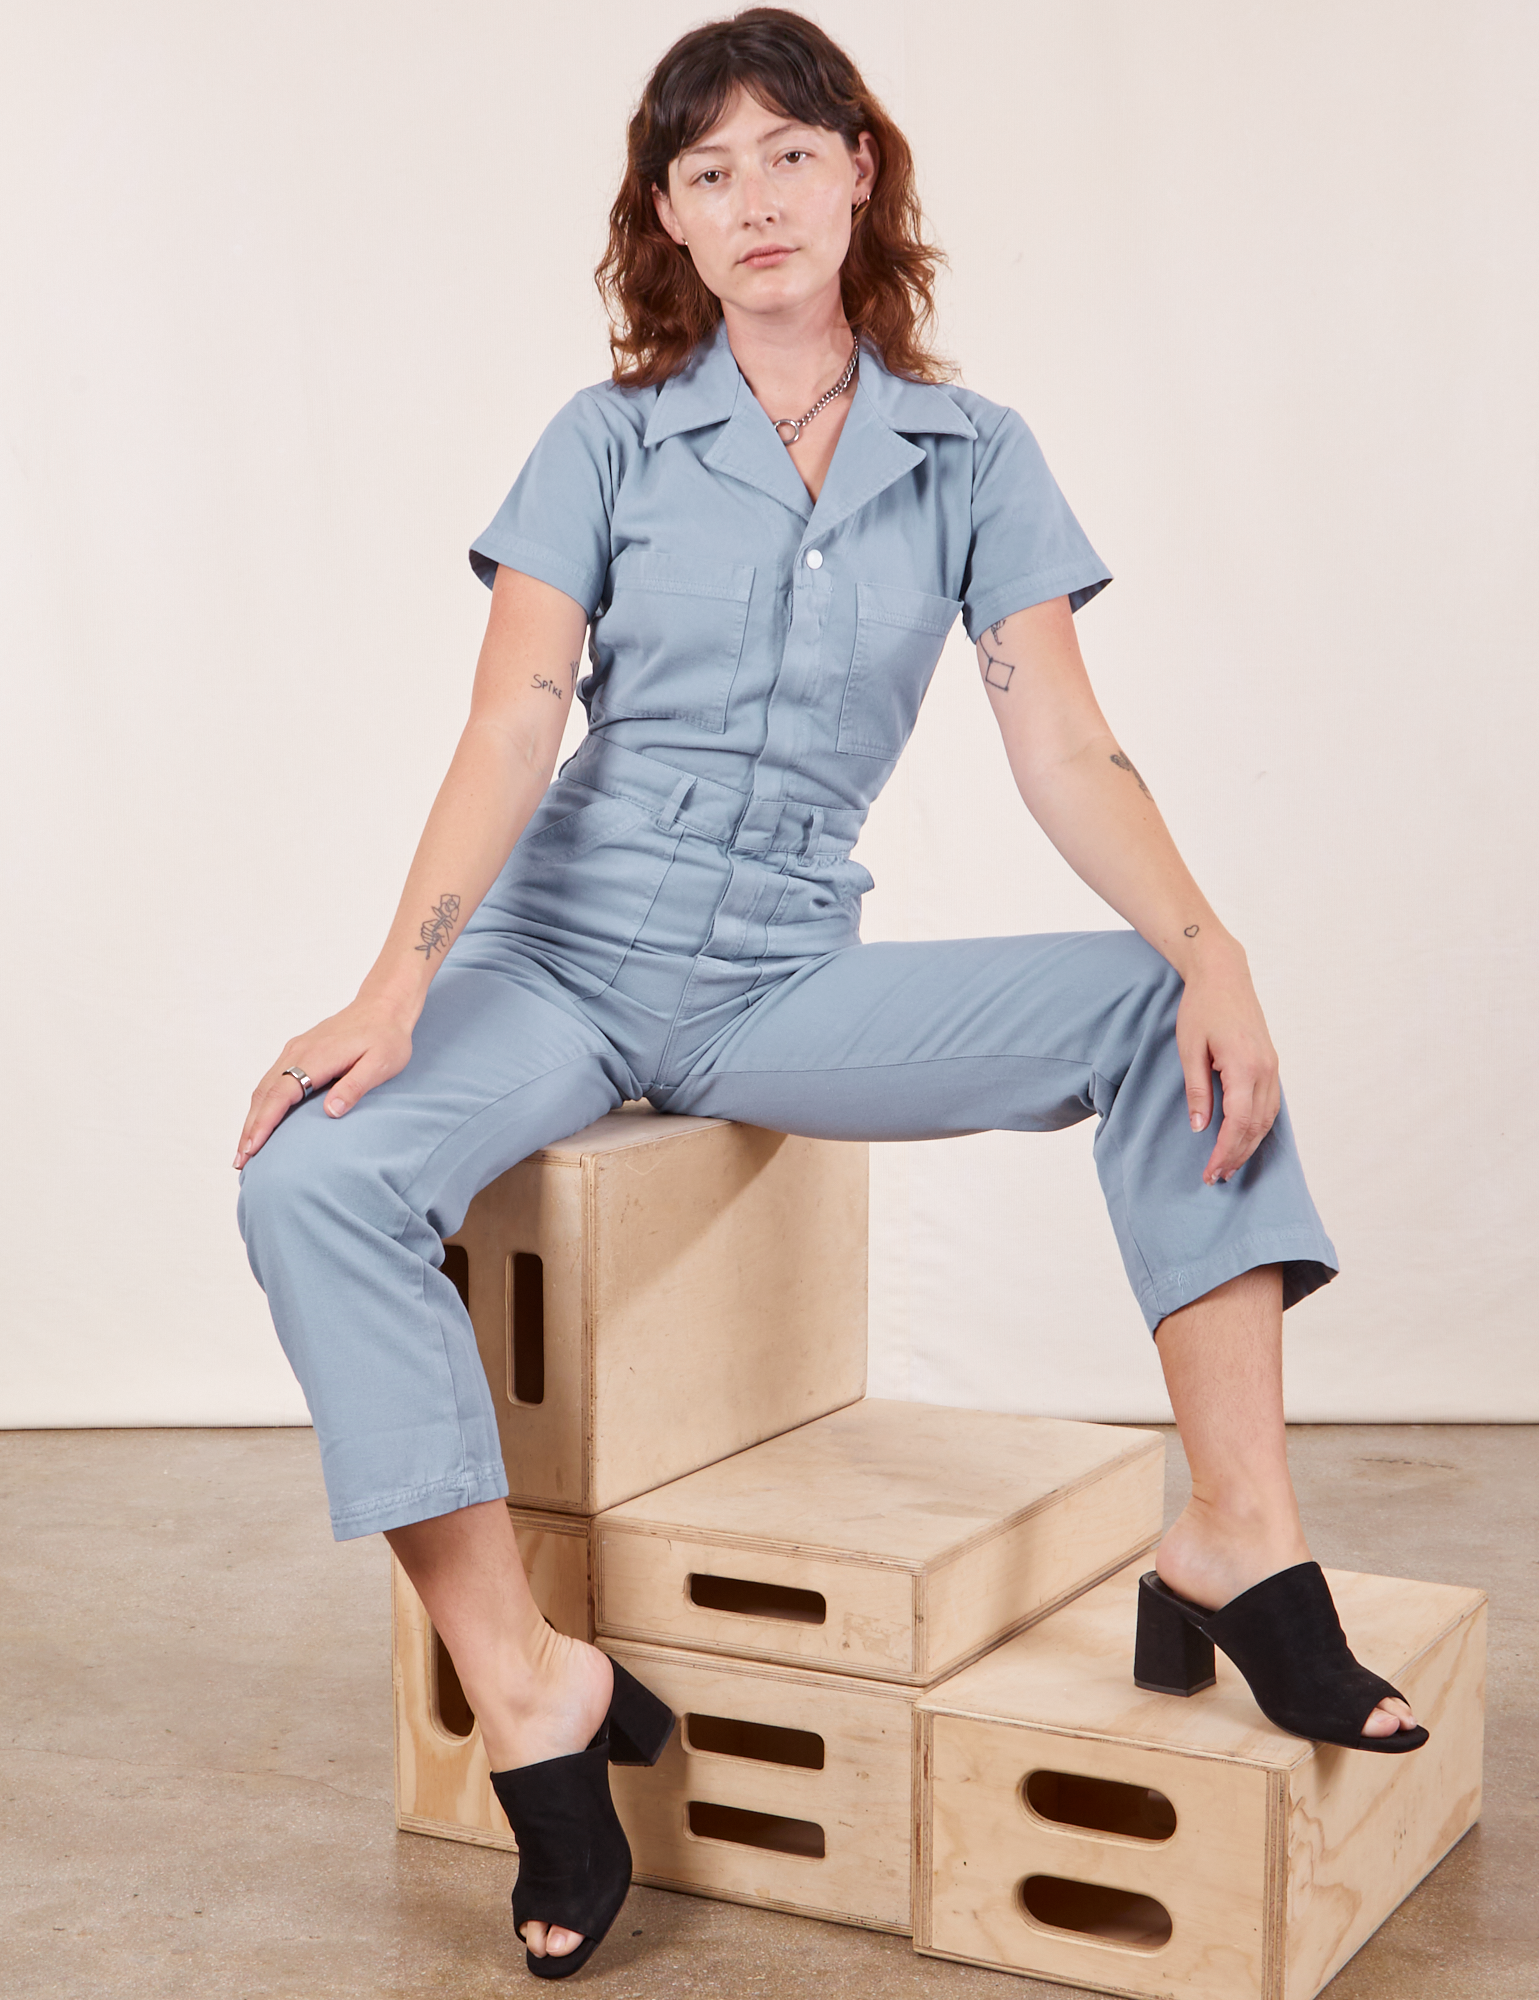 Alex is wearing Short Sleeve Jumpsuit in Periwinkle and sitting on a stack of wooden crates